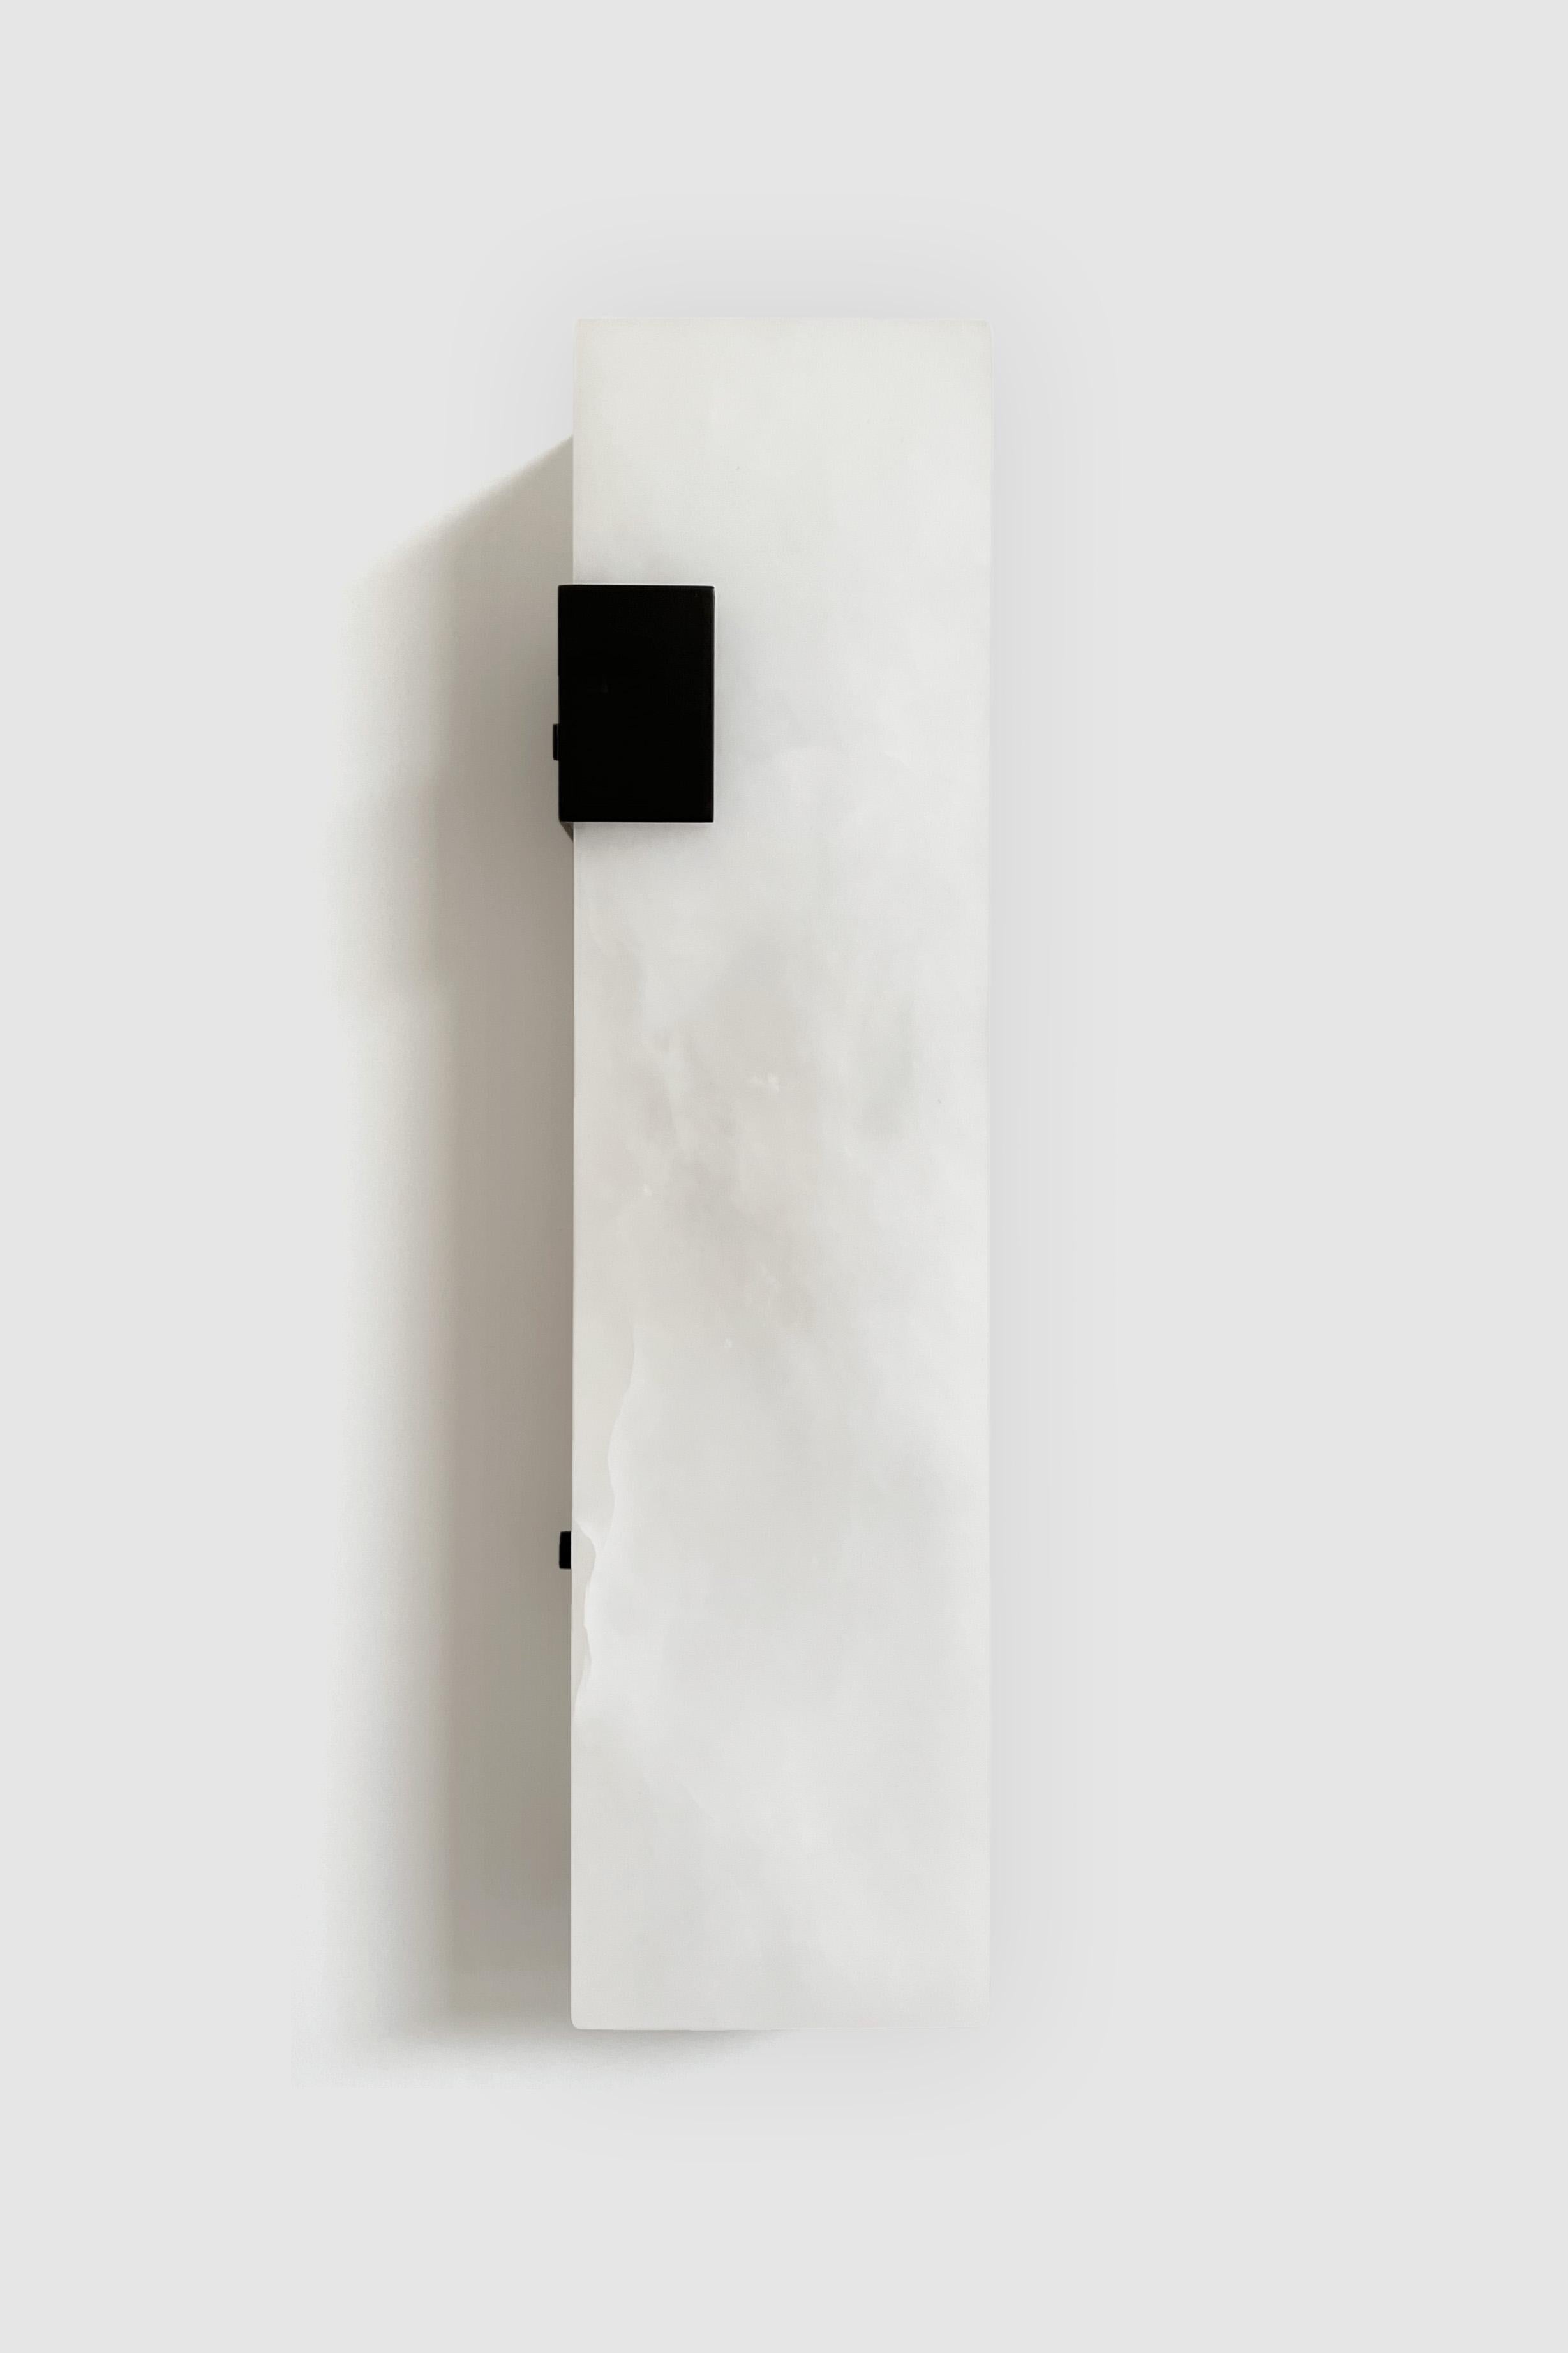 Orphan Work 003-1C Sconce
Shown in blackened brass and alabaster
Available in brushed brass, brushed nickel and blackened brass
Measures: 19” H x 5 1/4” W x 3 7/8” D
Wall or ceiling mount
Vertical or horizontal
Plug-in by request
1-4 adjustable